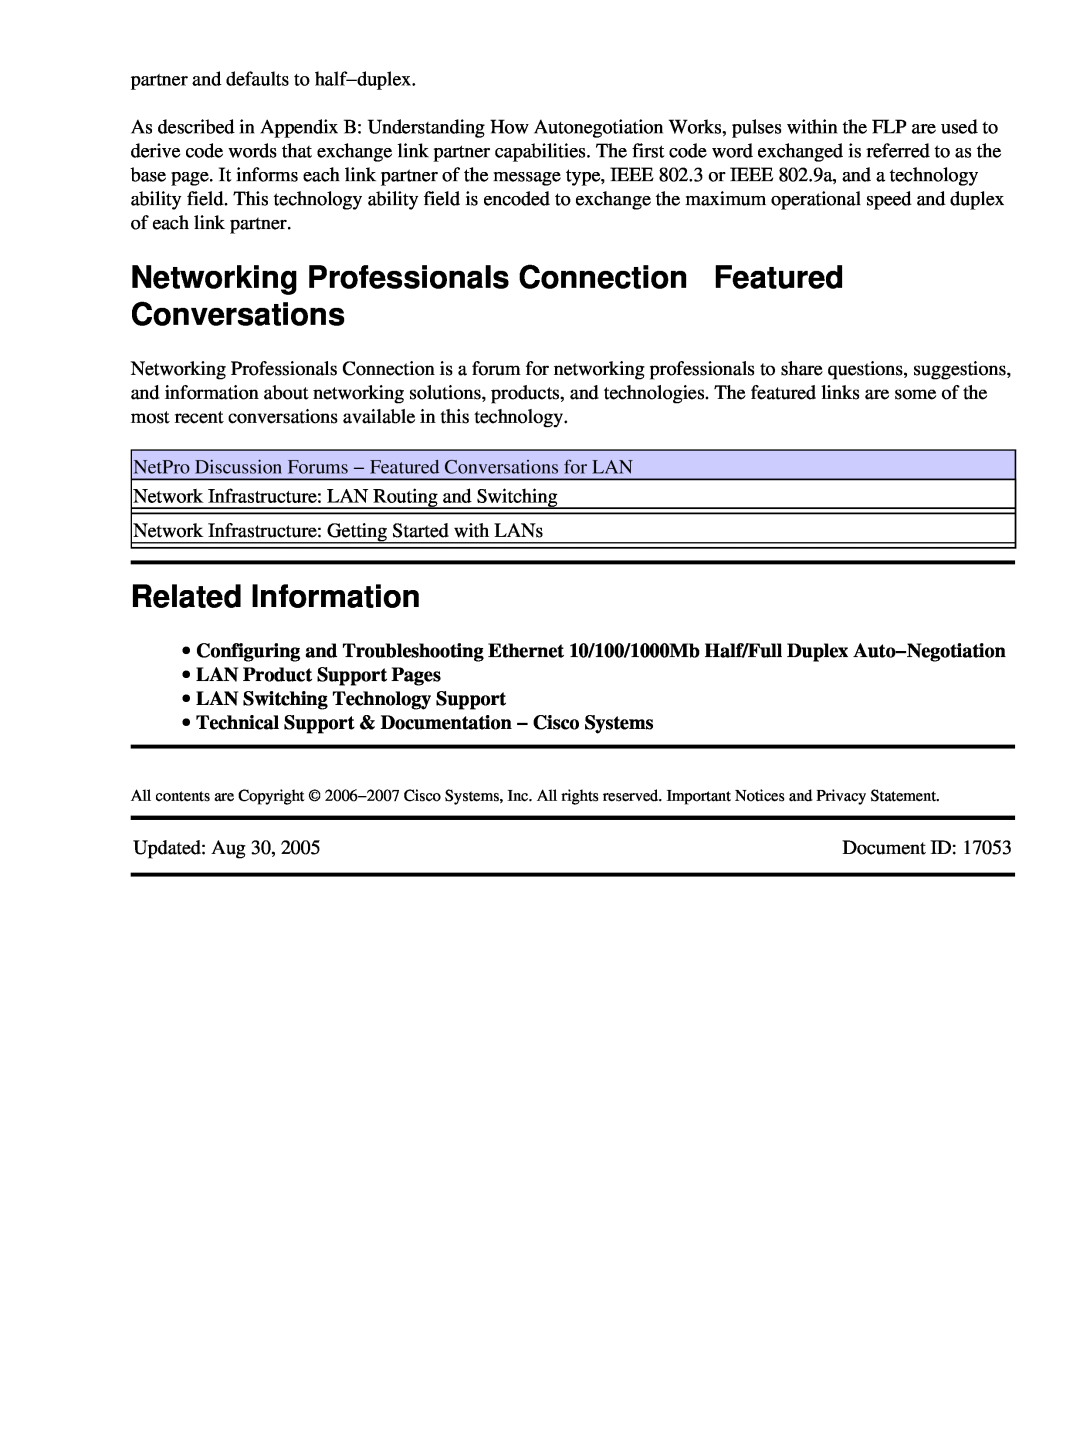 Cisco Systems 17053 appendix Networking Professionals Connection Featured Conversations, Related Information 